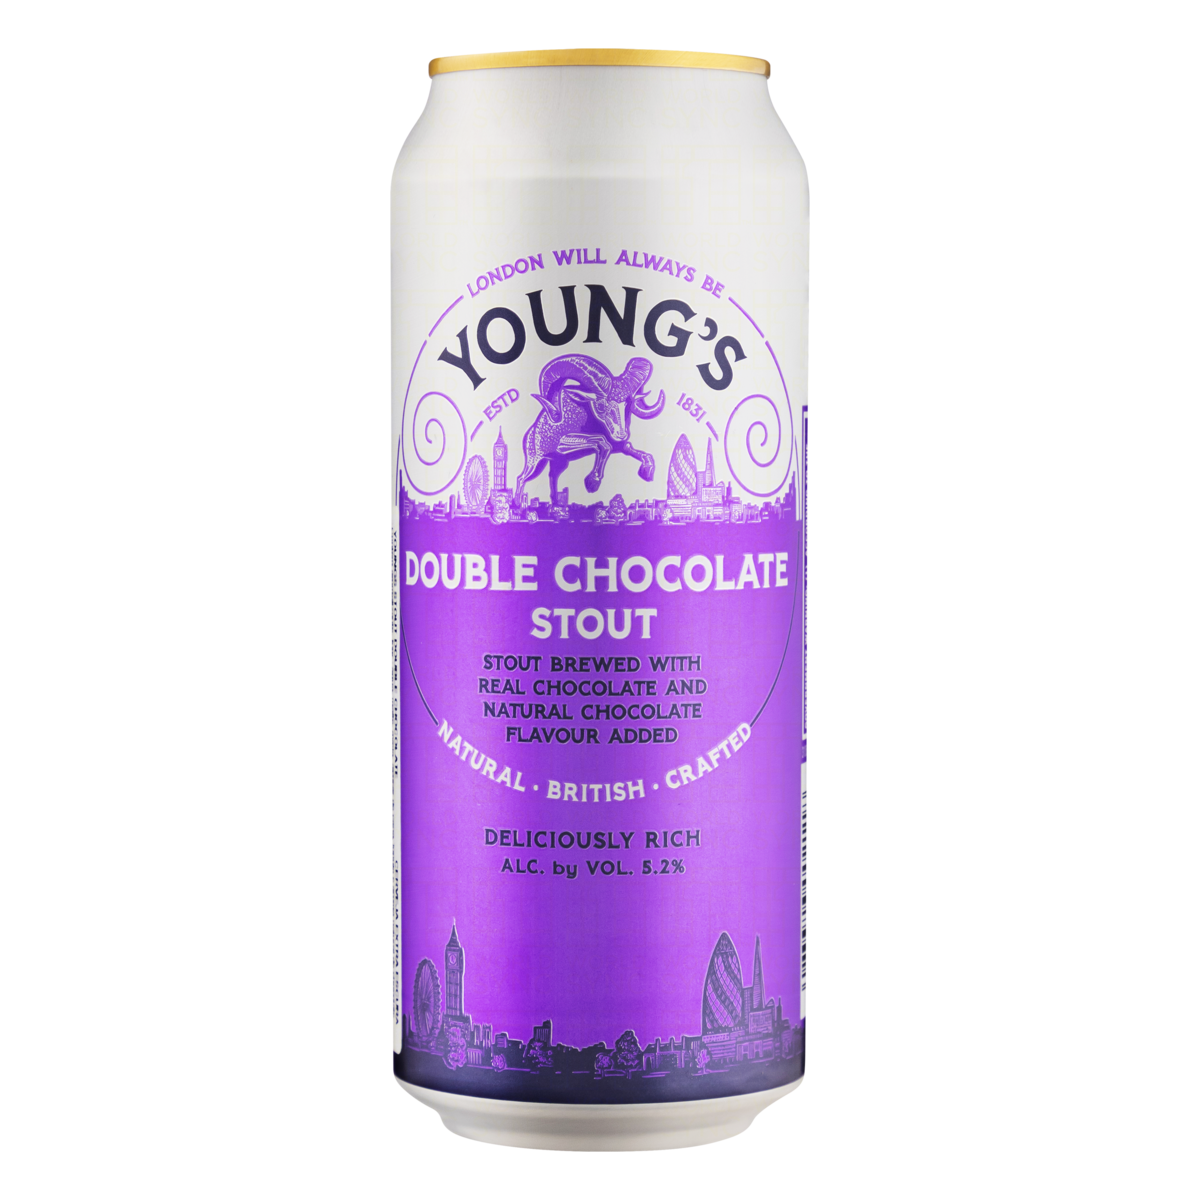 0083326002118 - CERVEJA STOUT DOUBLE CHOCOLATE YOUNGS LATA 440ML